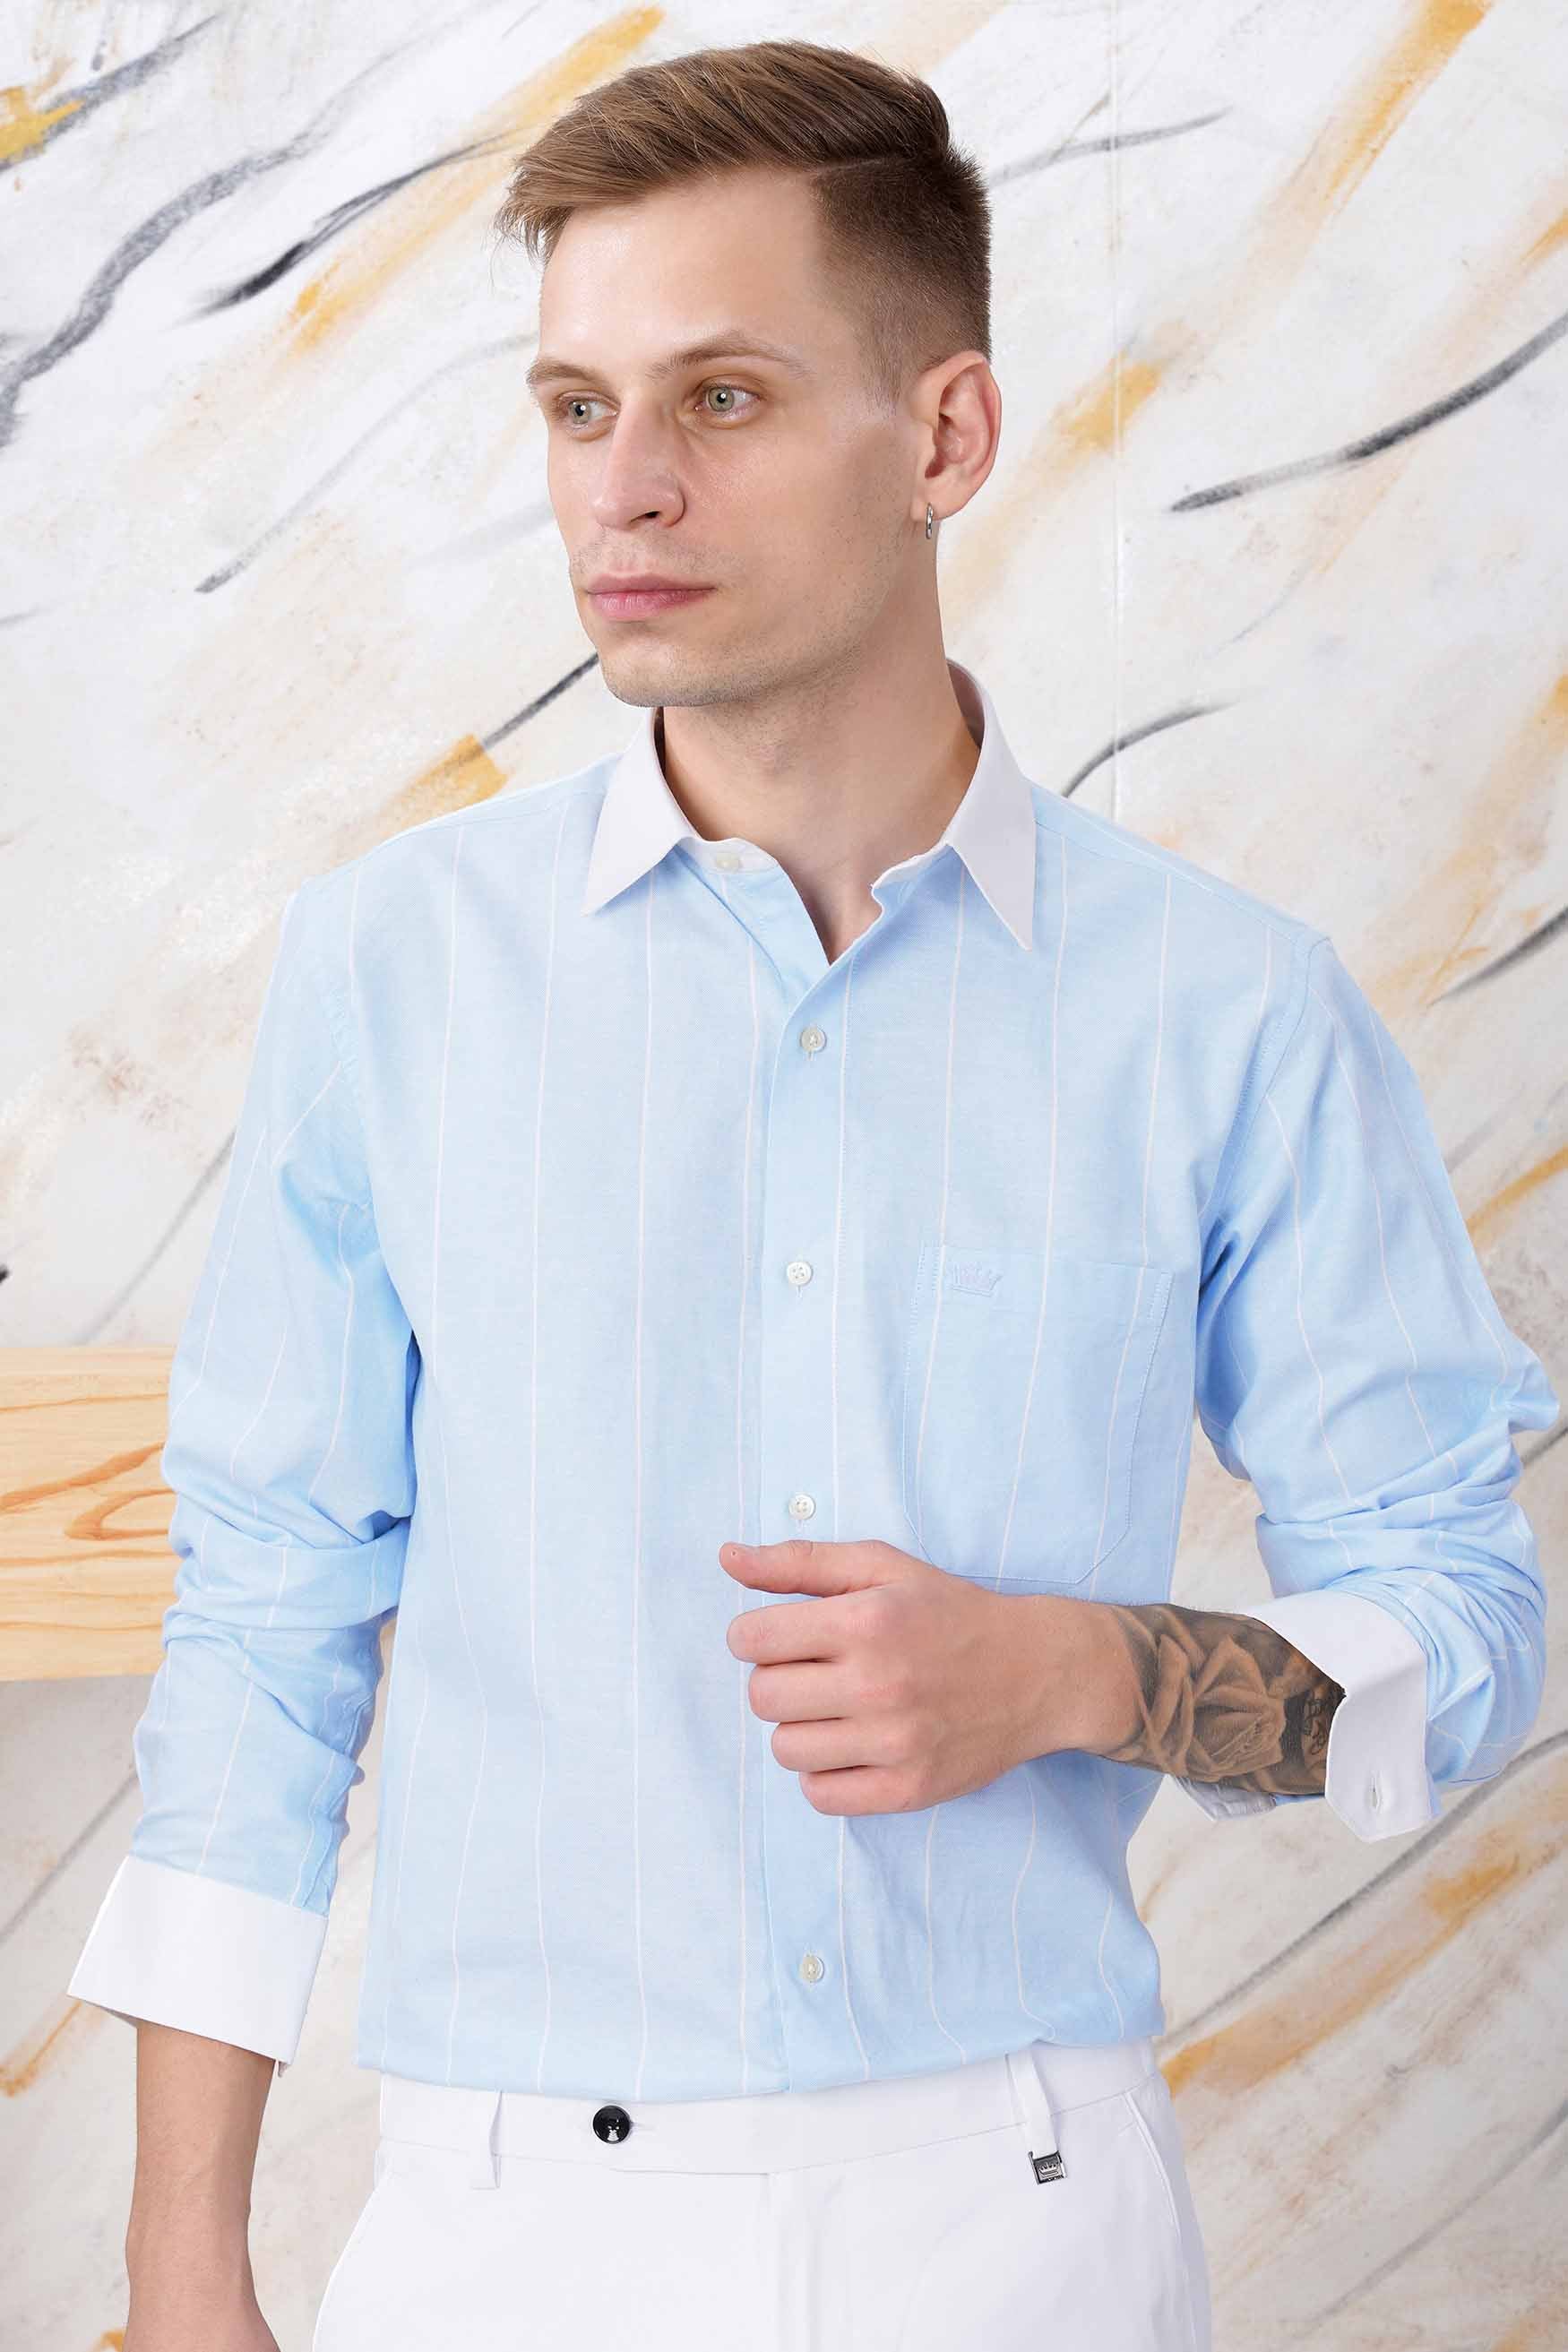 Hawkes Blue and White Striped with White Cuffs and Collar Royal Oxford Shirt 11590-WCC-38, 11590-WCC-H-38, 11590-WCC-39, 11590-WCC-H-39, 11590-WCC-40, 11590-WCC-H-40, 11590-WCC-42, 11590-WCC-H-42, 11590-WCC-44, 11590-WCC-H-44, 11590-WCC-46, 11590-WCC-H-46, 11590-WCC-48, 11590-WCC-H-48, 11590-WCC-50, 11590-WCC-H-50, 11590-WCC-52, 11590-WCC-H-52